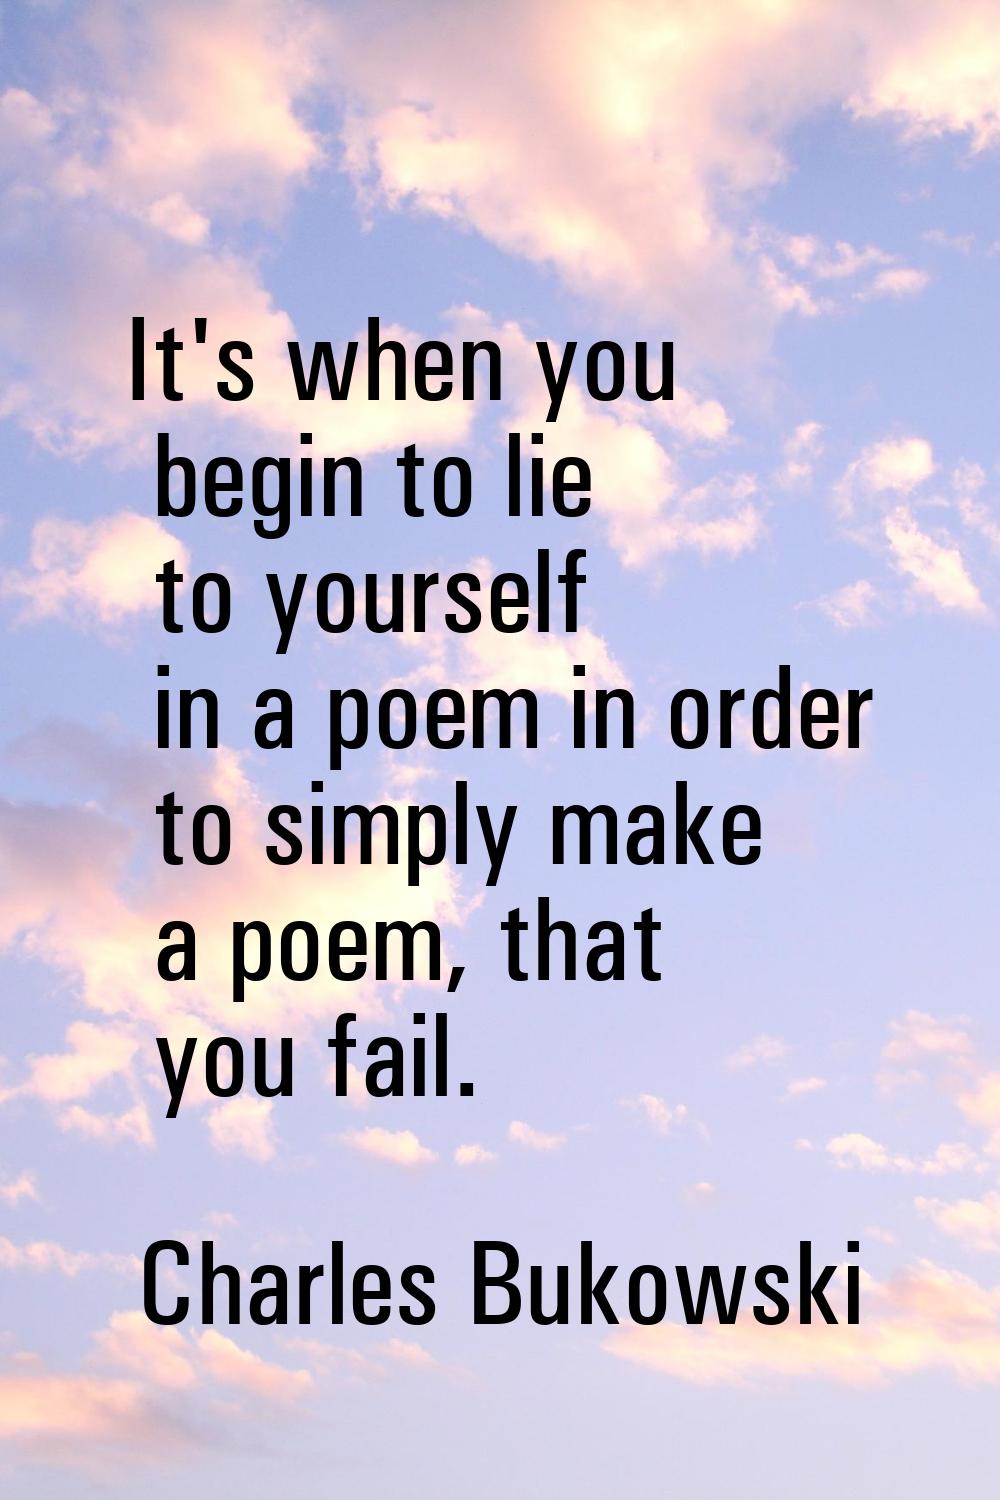 It's when you begin to lie to yourself in a poem in order to simply make a poem, that you fail.